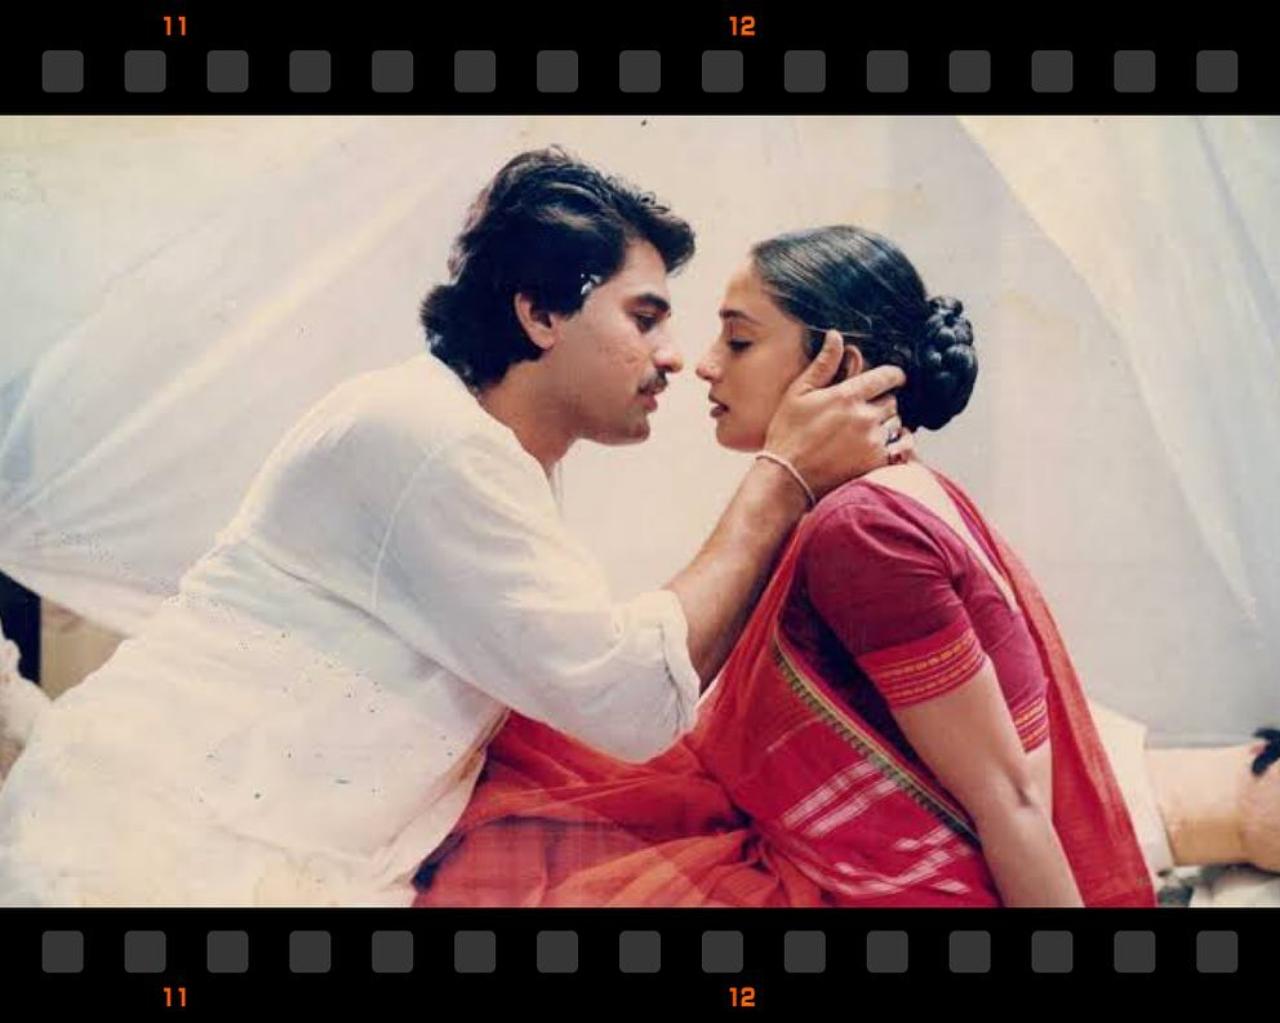 Madhuri Dixit and Ayub Khan played the central couple of Ketki and Vinay in the film. 